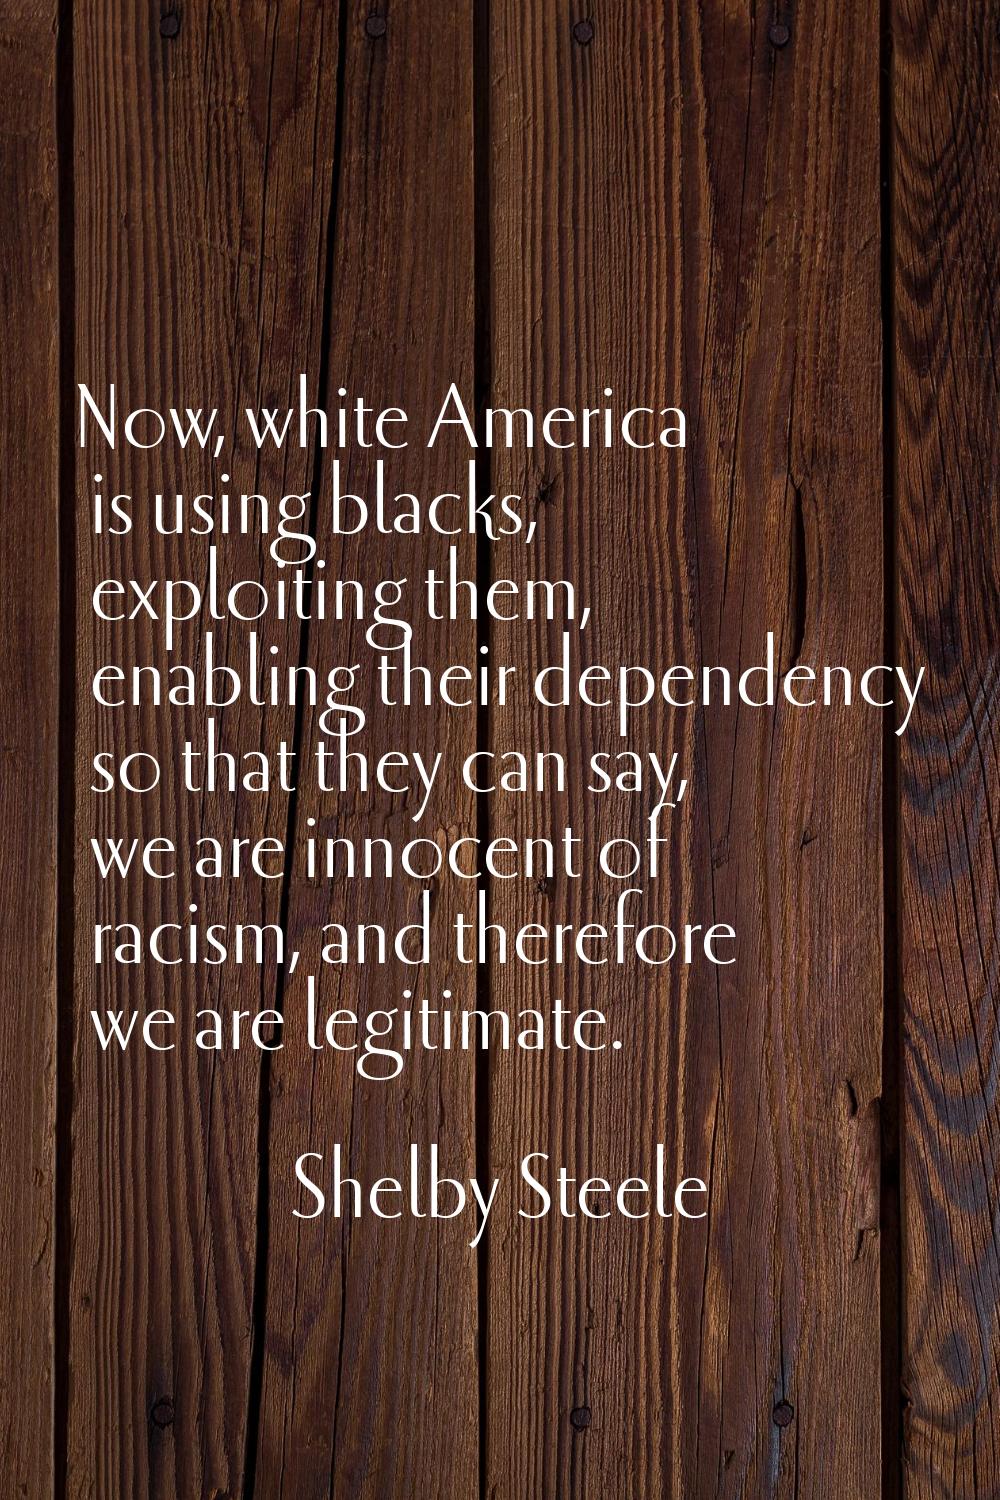 Now, white America is using blacks, exploiting them, enabling their dependency so that they can say